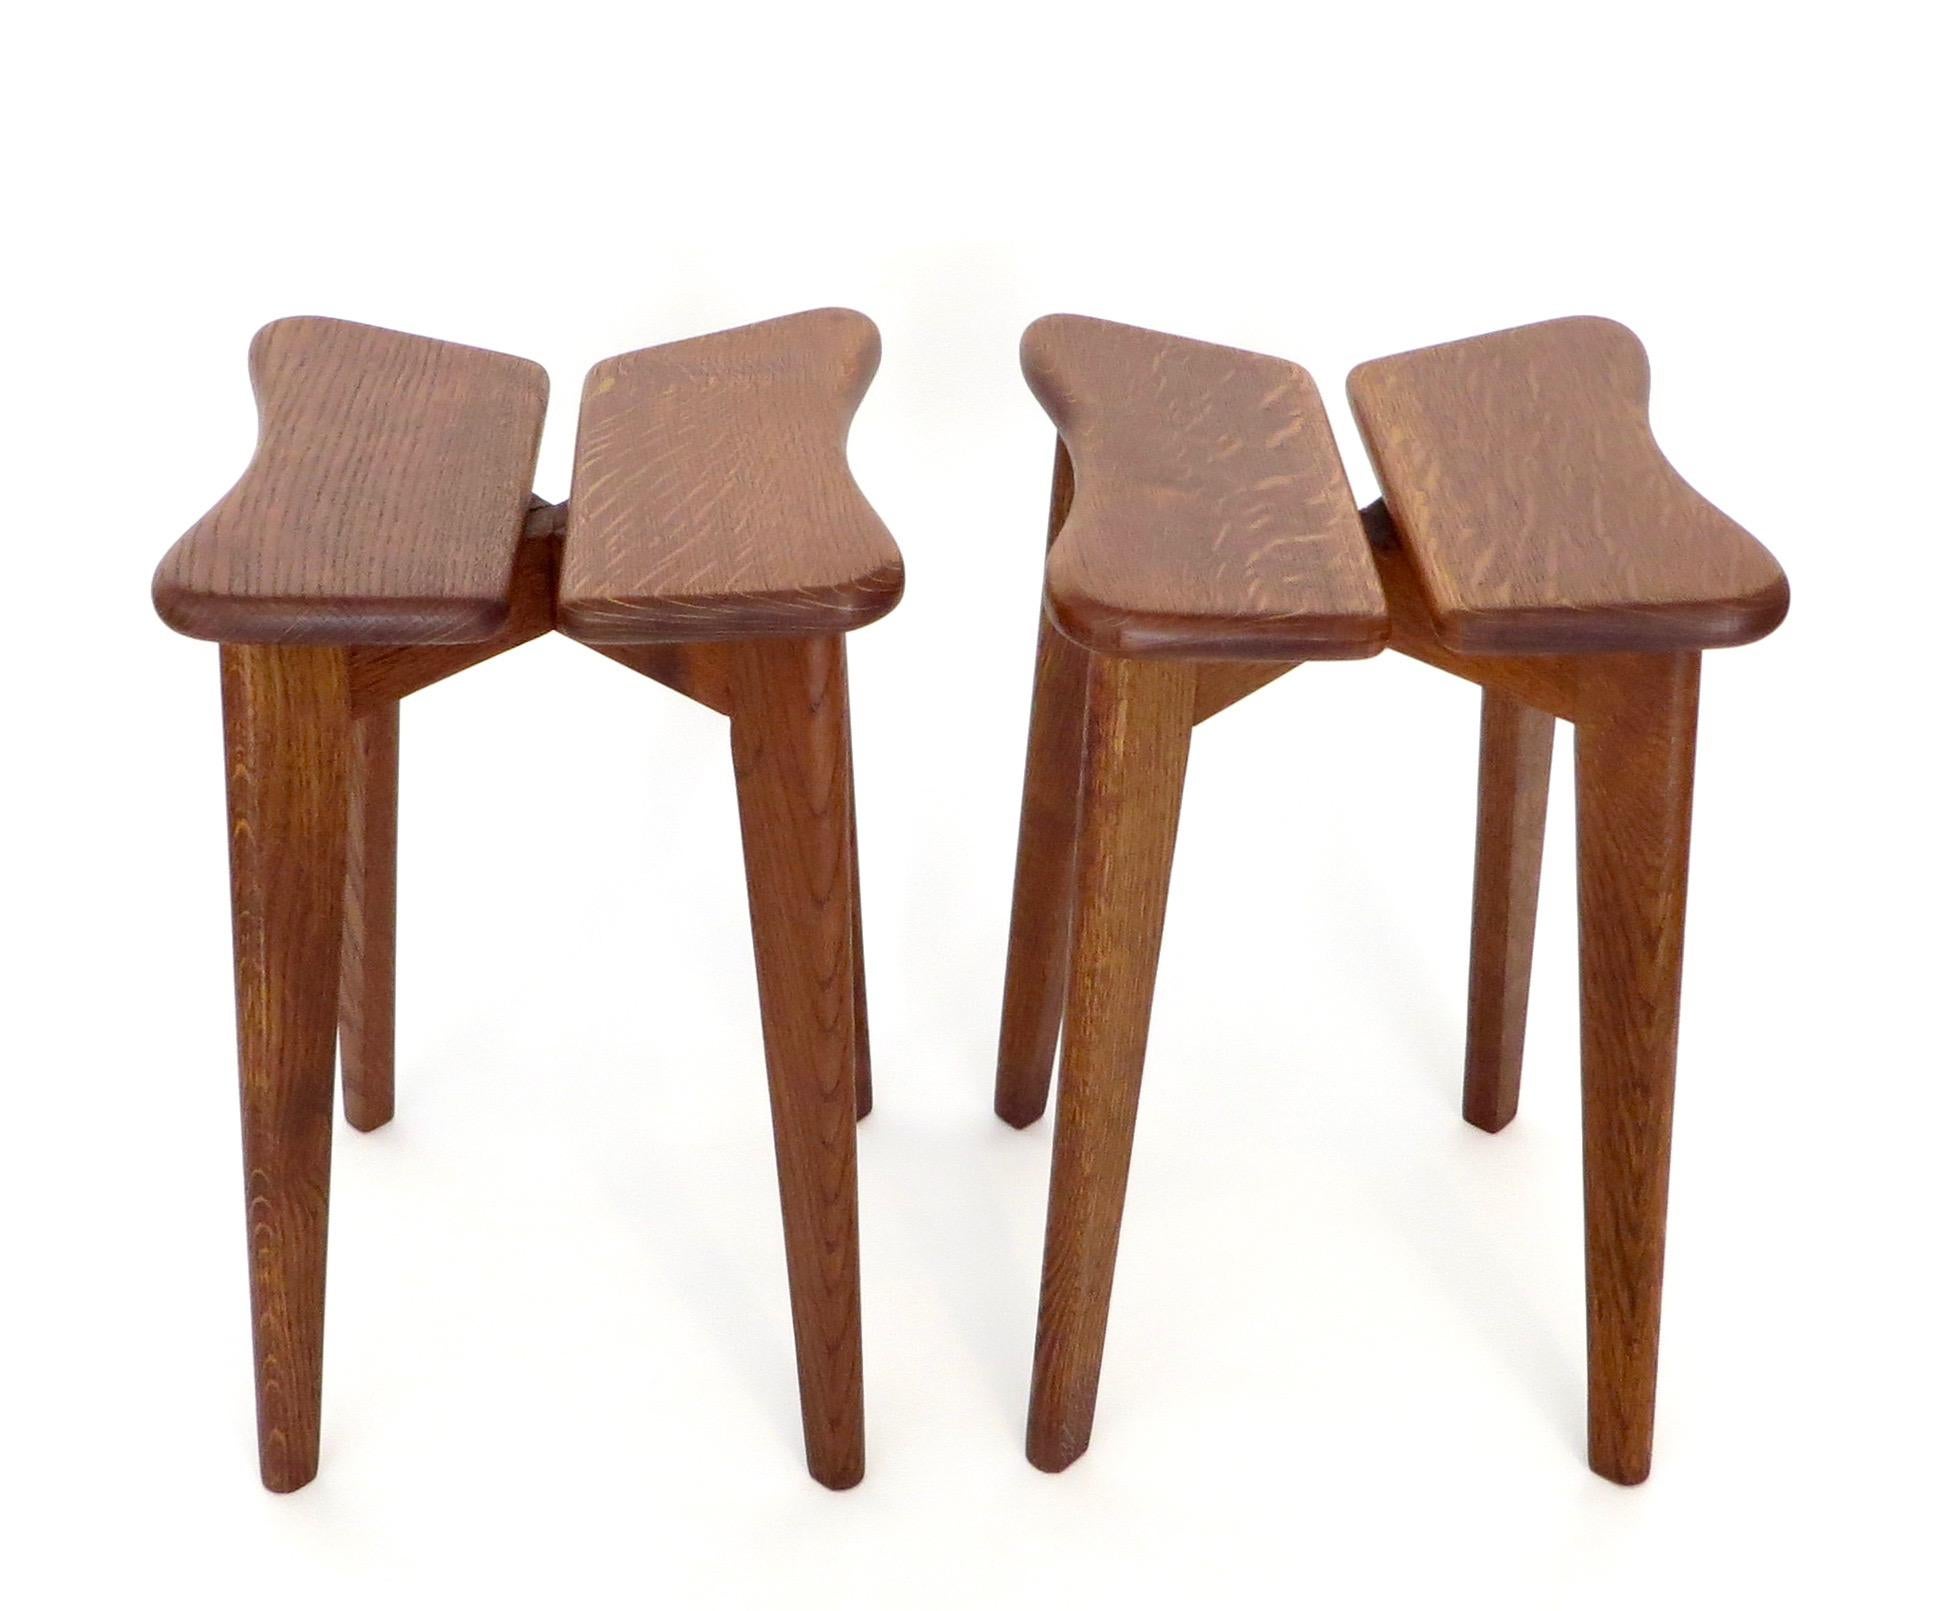 A pair of French designer Marcel Gascoin French oak tabourets or side tables. Edition Trefle for Arhec, circa 1953.
Marcel Gascoin was part of the French reconstruction furniture movement after WWII. It was furniture designed for the people that